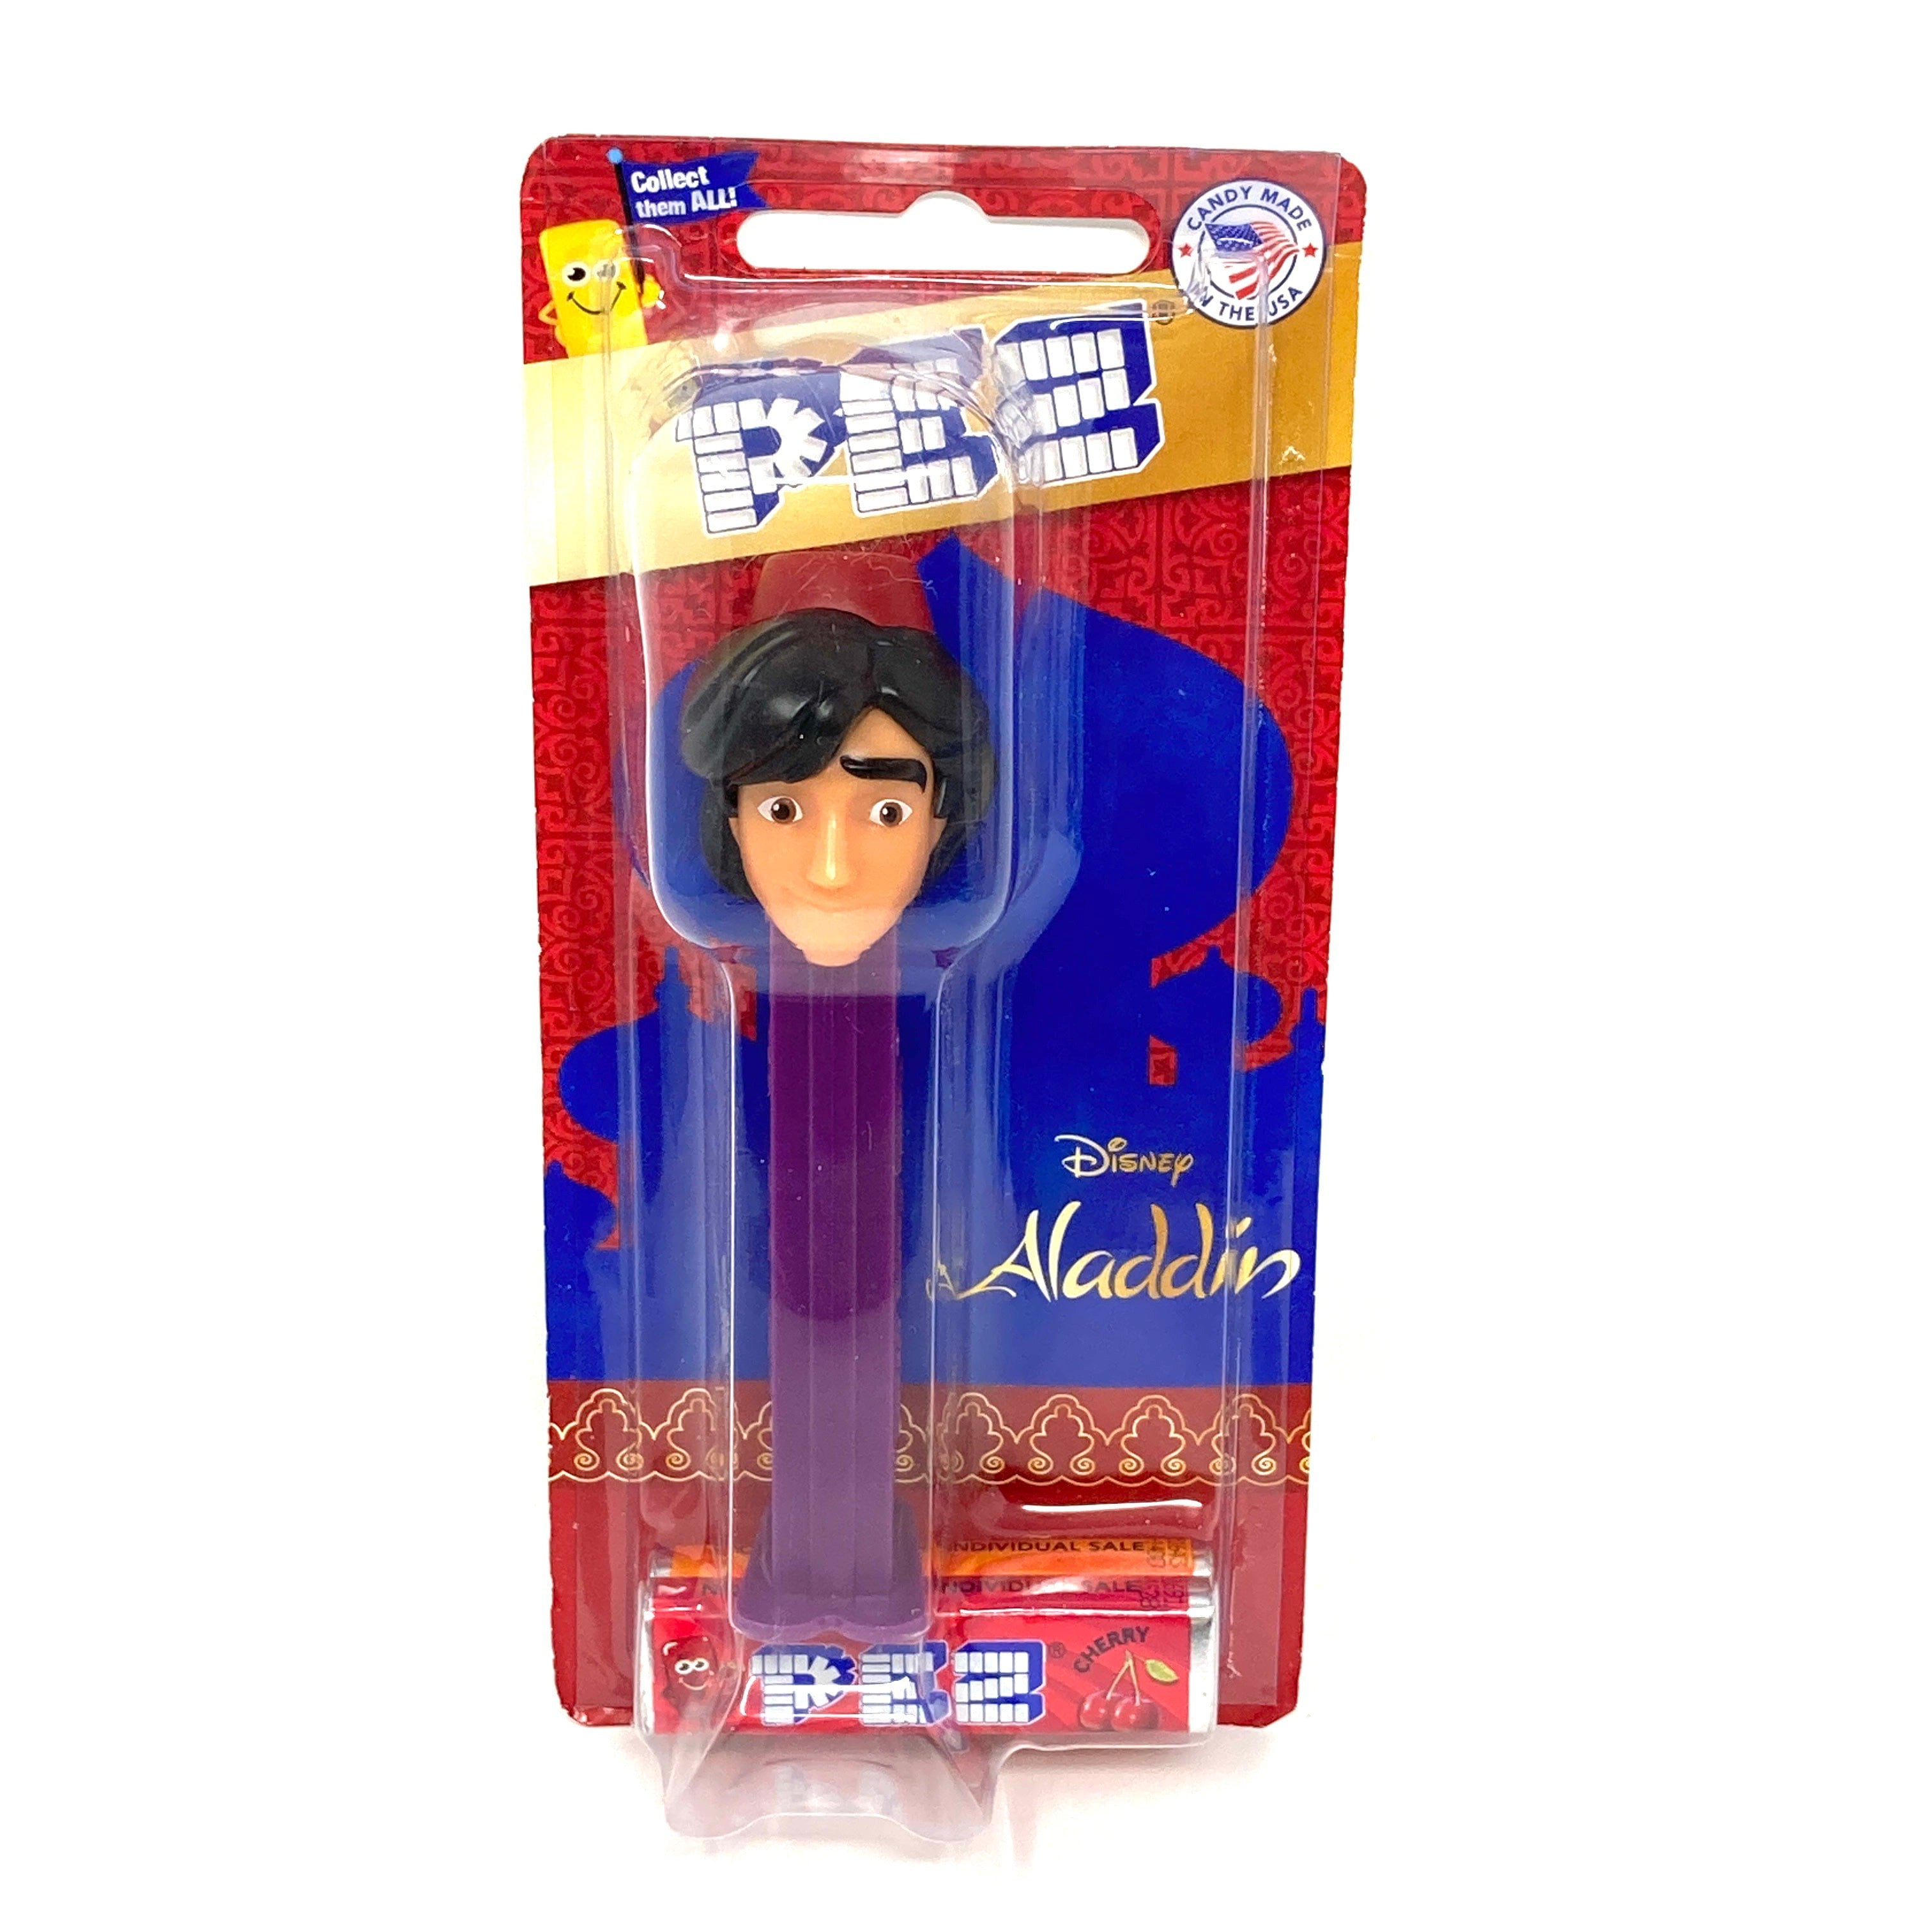 ALADDIN PEZ Dispensers 2 pack Includes 4 Rolls of Candy ALADDIN and GENIE 